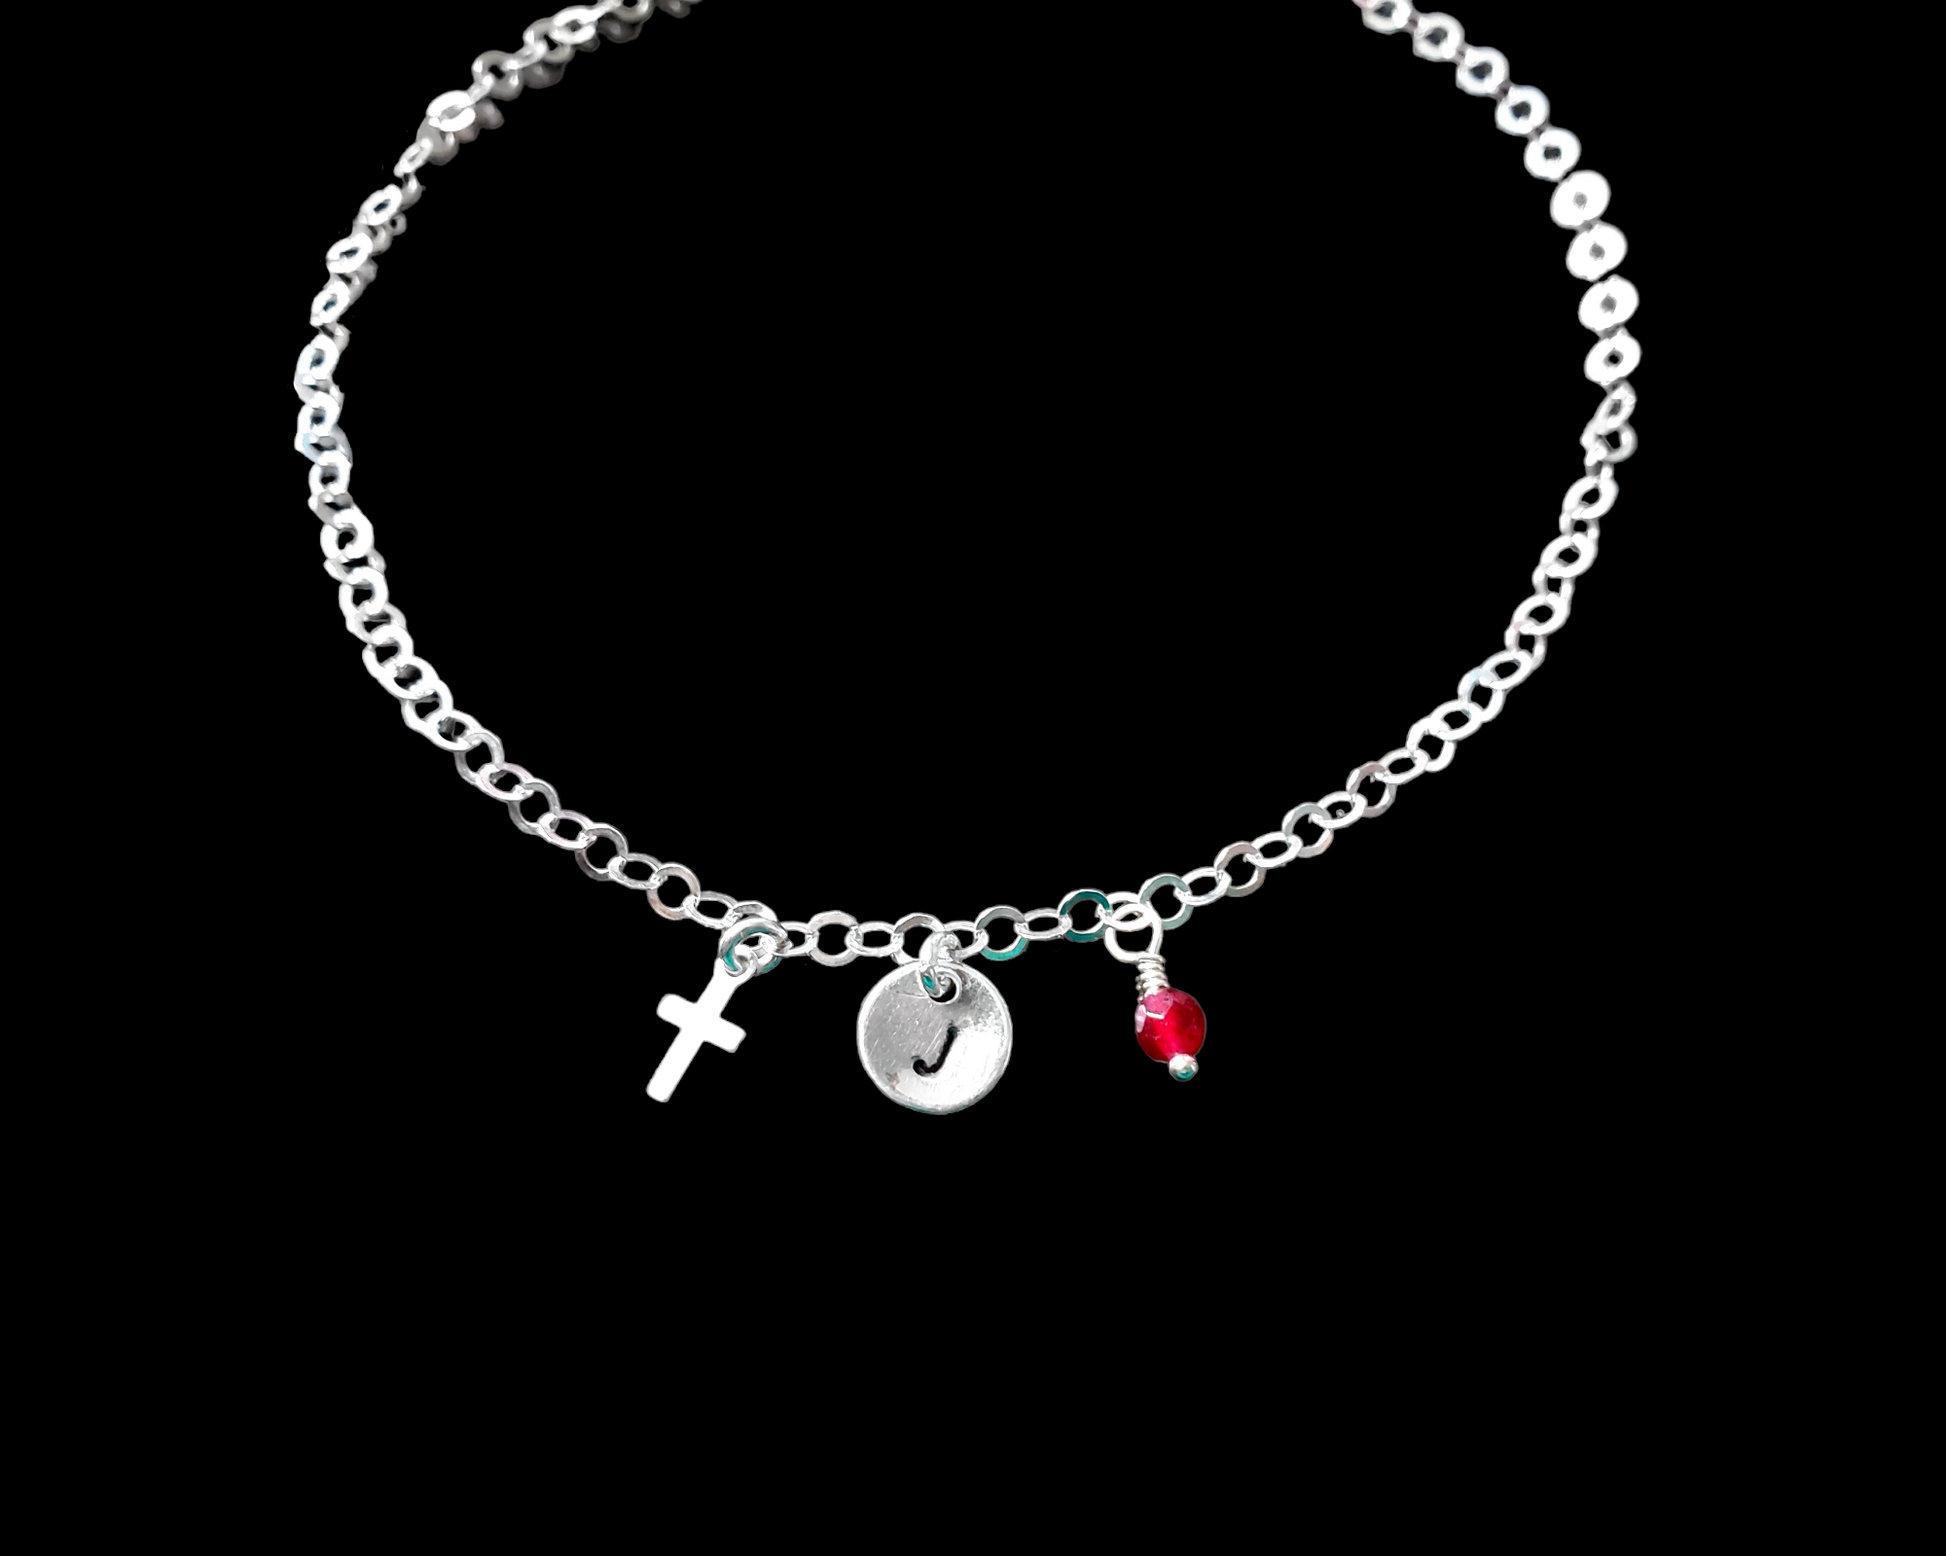 Personalized Cross, Eternity, Birthstone, Initial Anklet-Ankle Bracelet with a Small Cross, Initial pendant, Birthstone and Celtic Eternity Coil dangle on sparkly chain